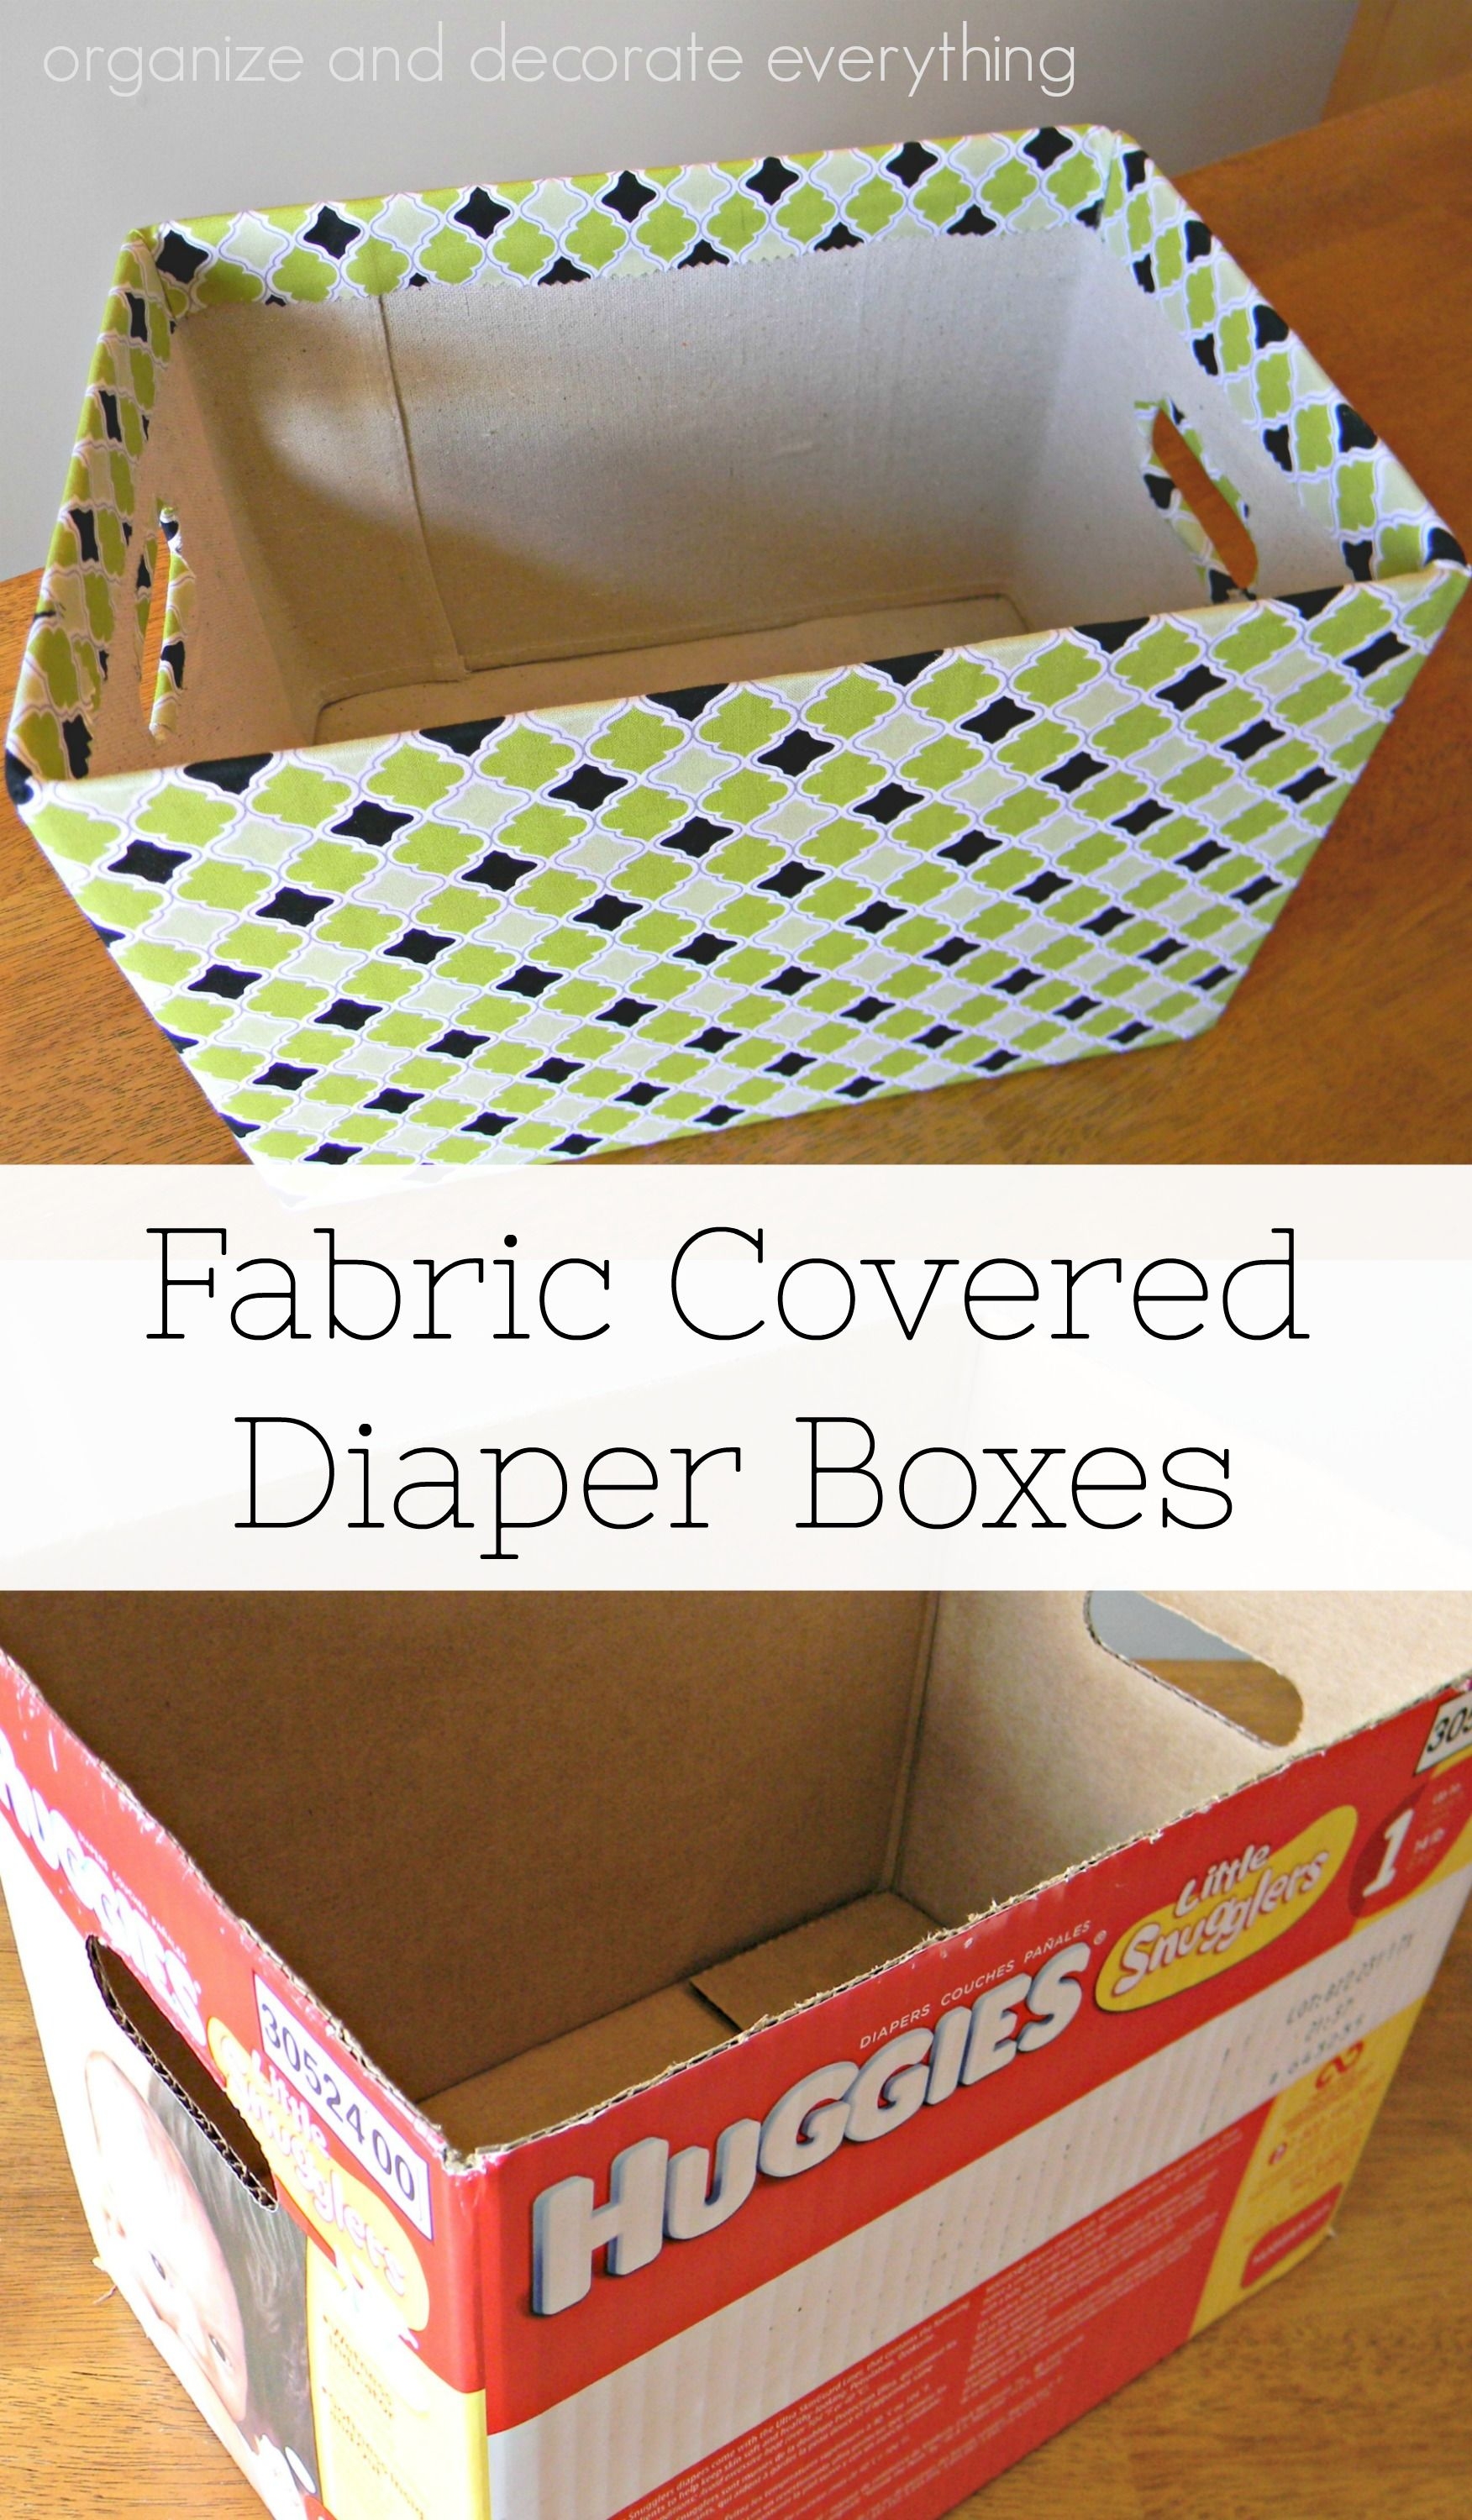 Fabric Covered Diaper Boxes - 31 Days Of Organizing And